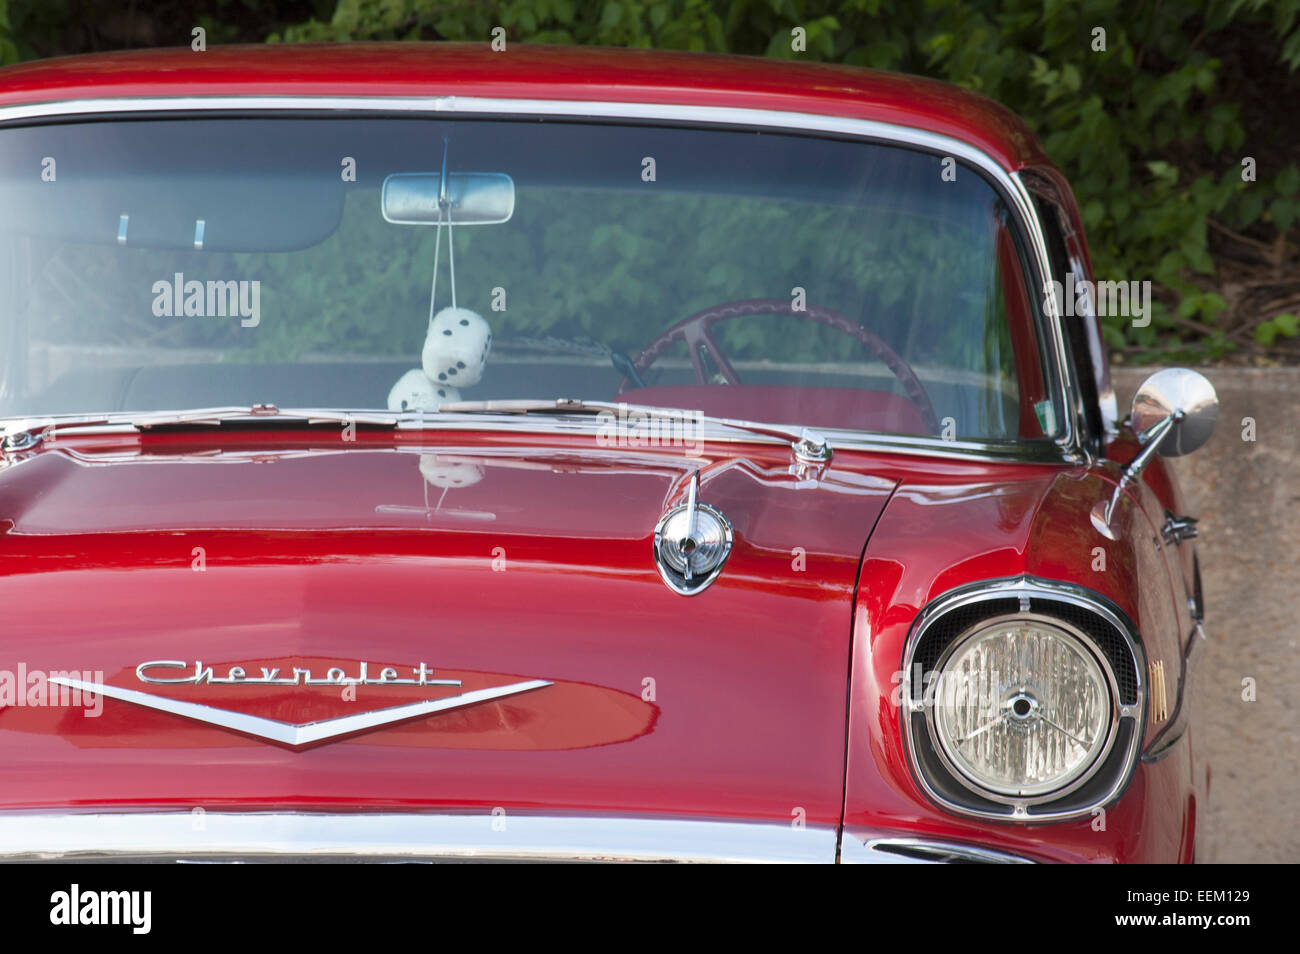 Detail of a classic 1950's model red Chevrolet motorcar Stock Photo